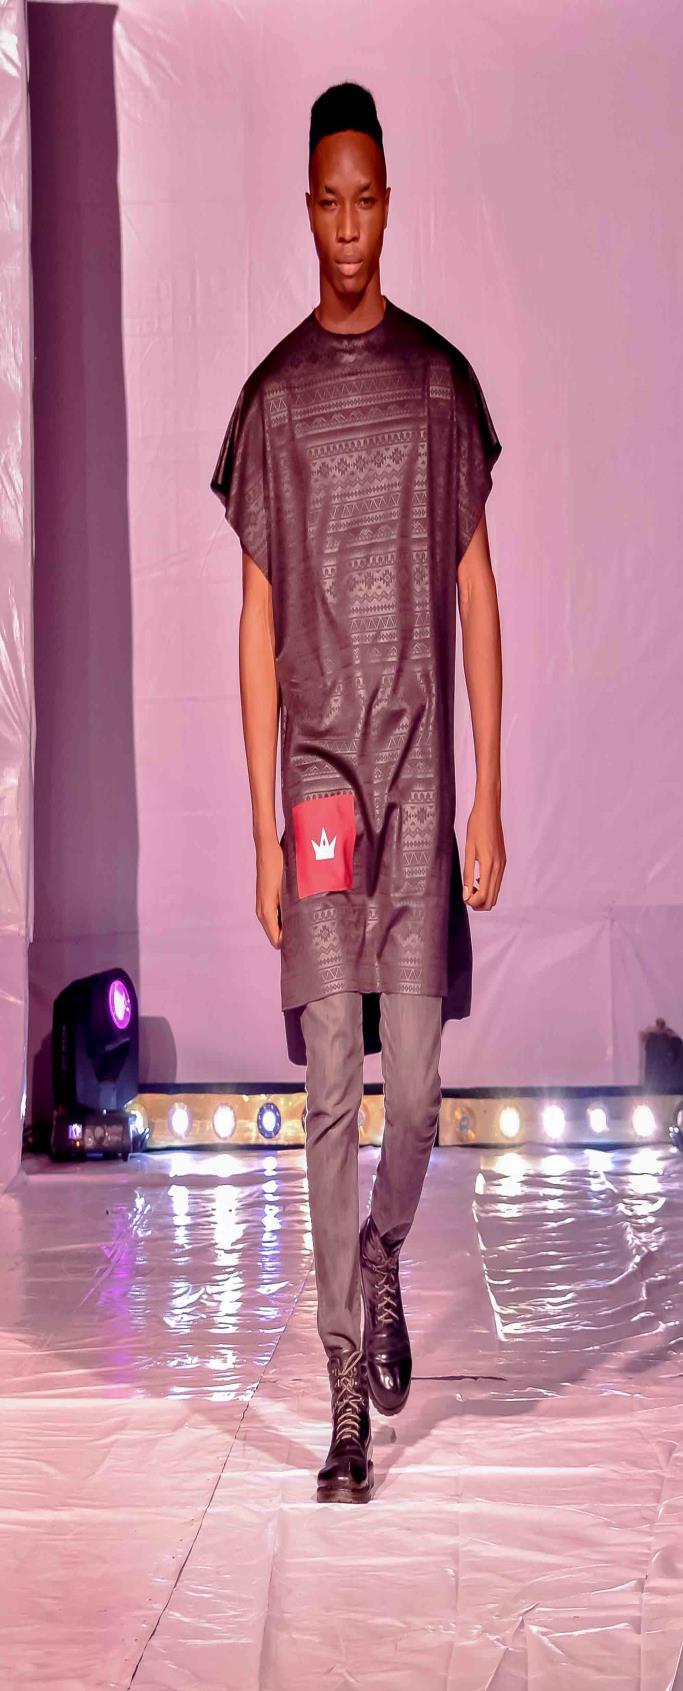 VISION The Lagos Urban Fashion Show 2018 is focused on uniting the international and Nigerian street wear designers, providing them with an opportunity to showcase their collections on a professional